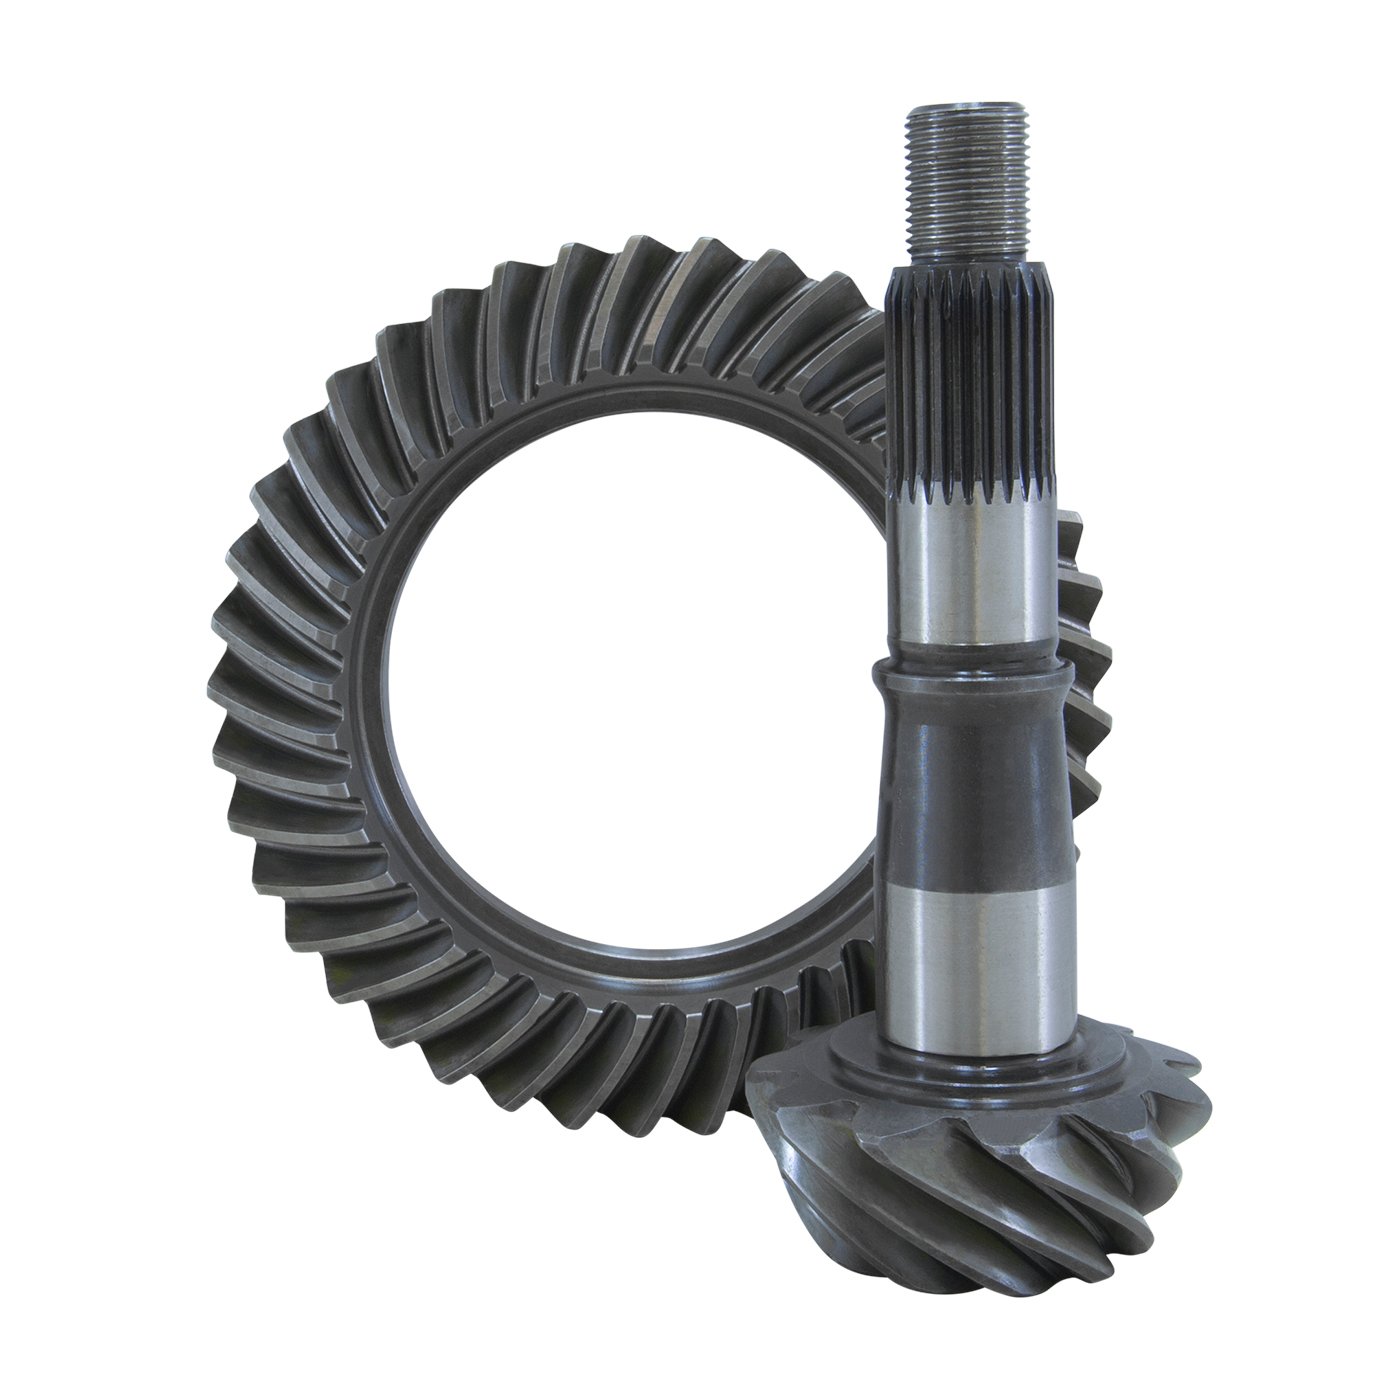 USA Standard ZG GM7.5-323 Ring & Pinion Gear Set, For GM 7.5 in., 3.23 Ratio